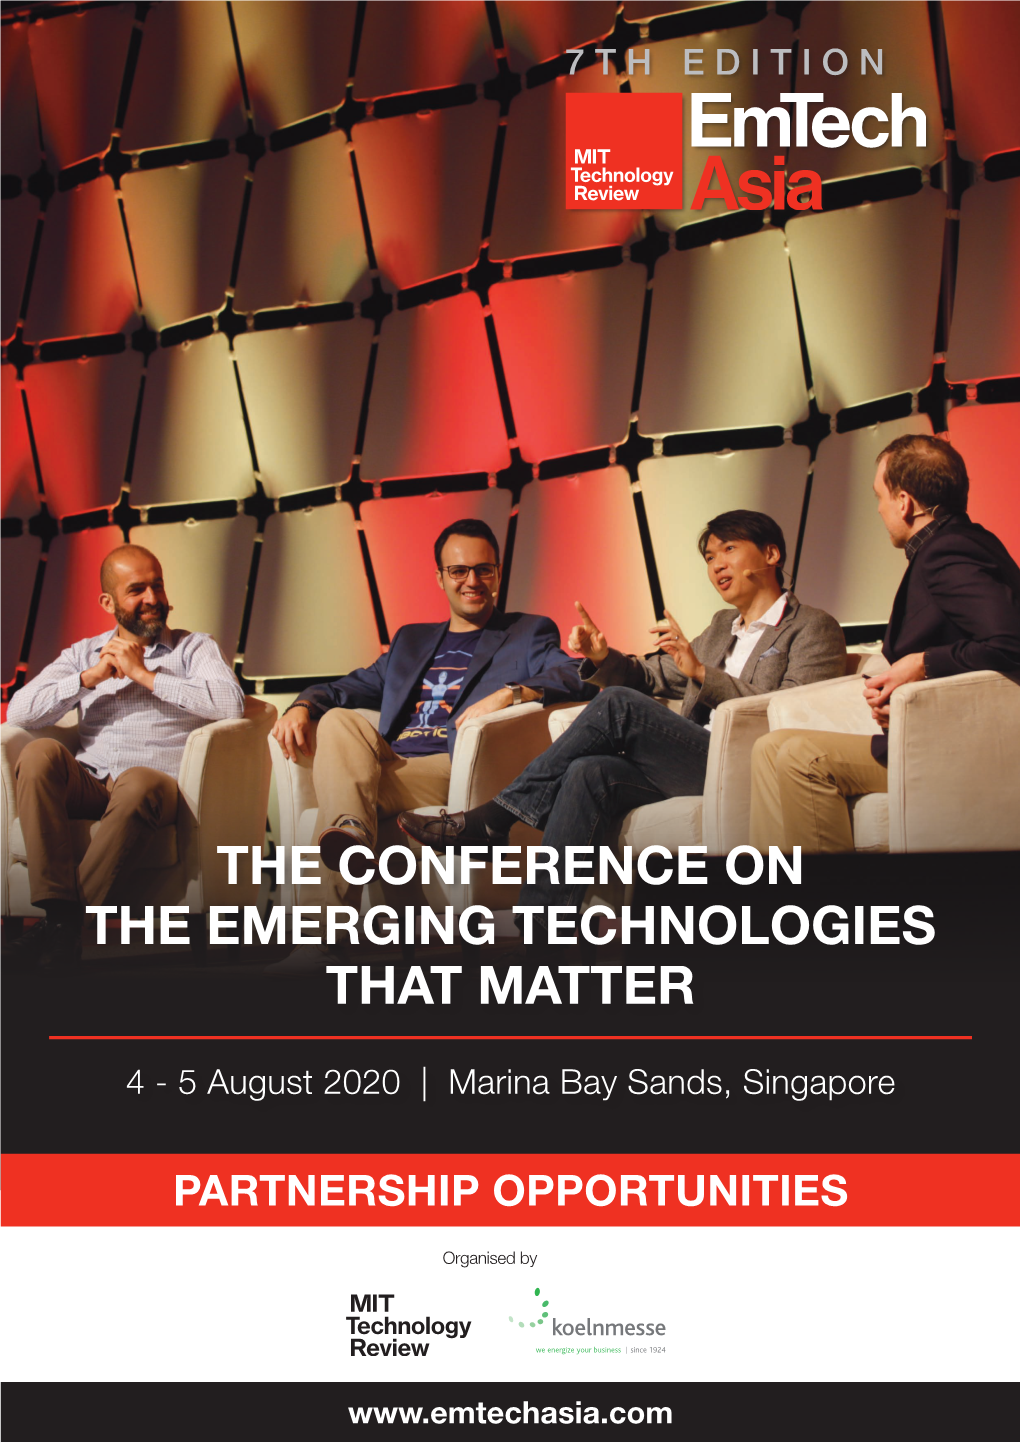 The Conference on the Emerging Technologies That Matter